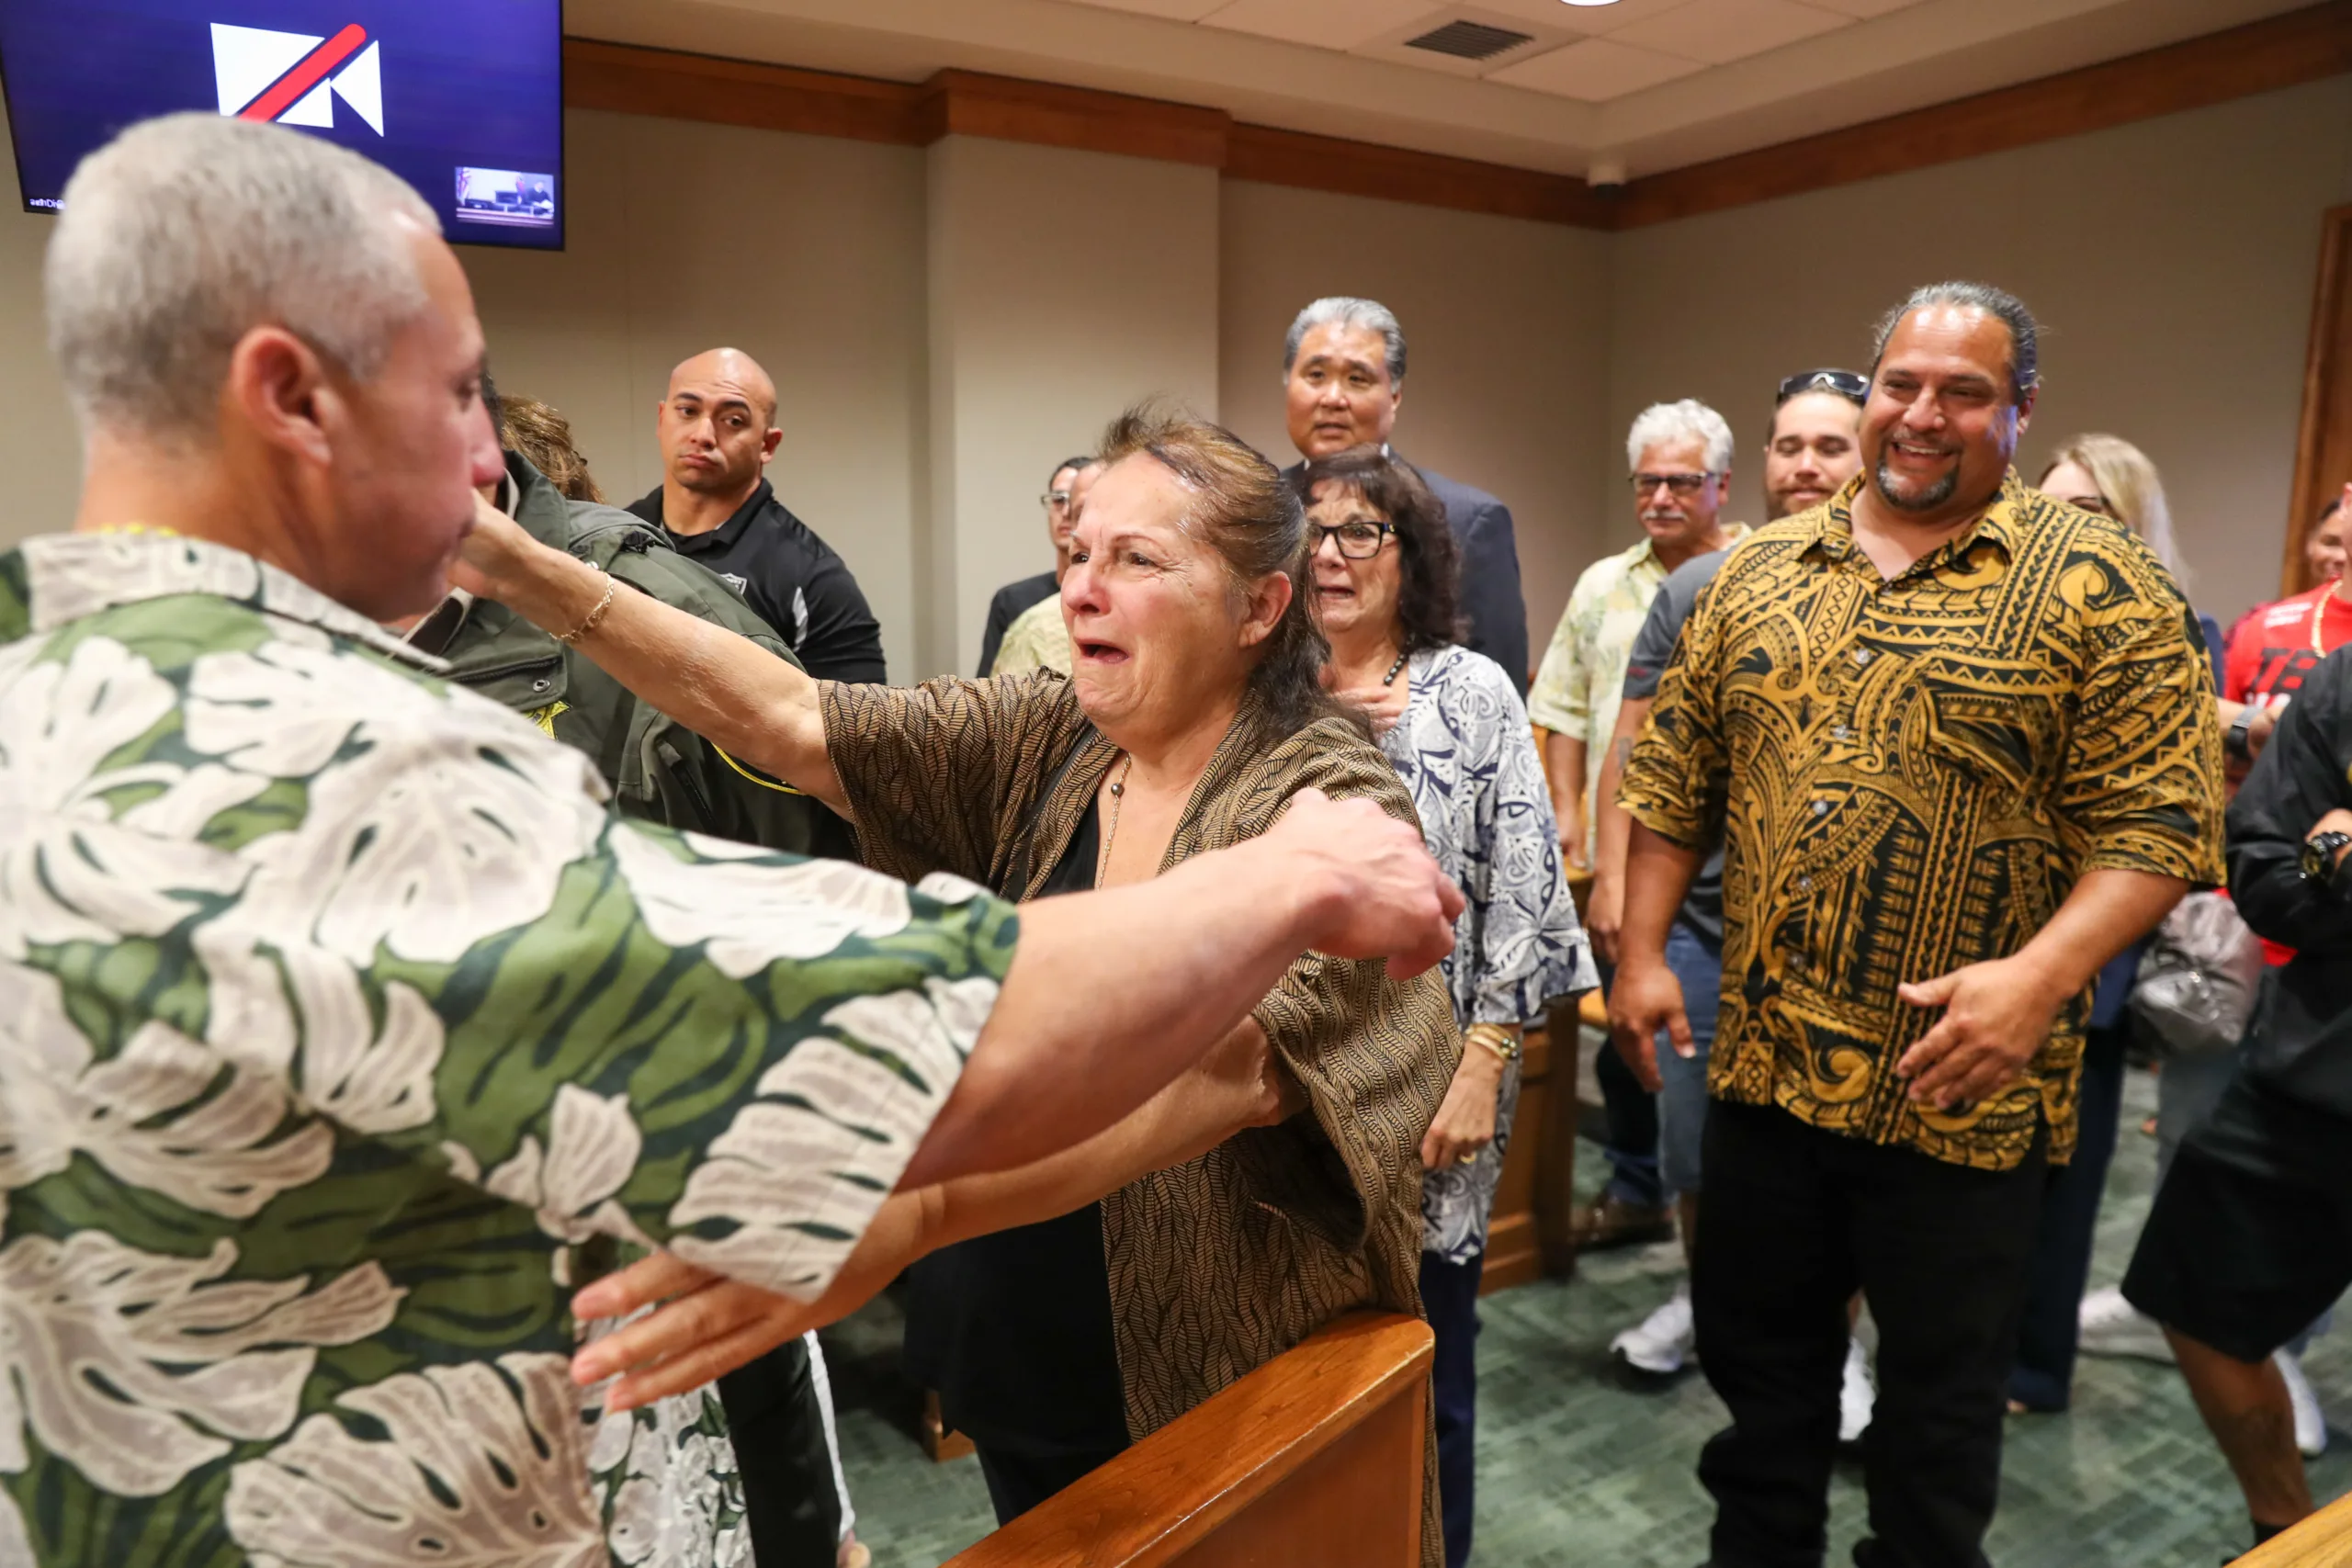 Images from the Albert “Ian” Schweitzer court case Tuesday, Jan. 24, 2023 in Hilo, Hawaii. (Marco Garcia/The Innocence Project)